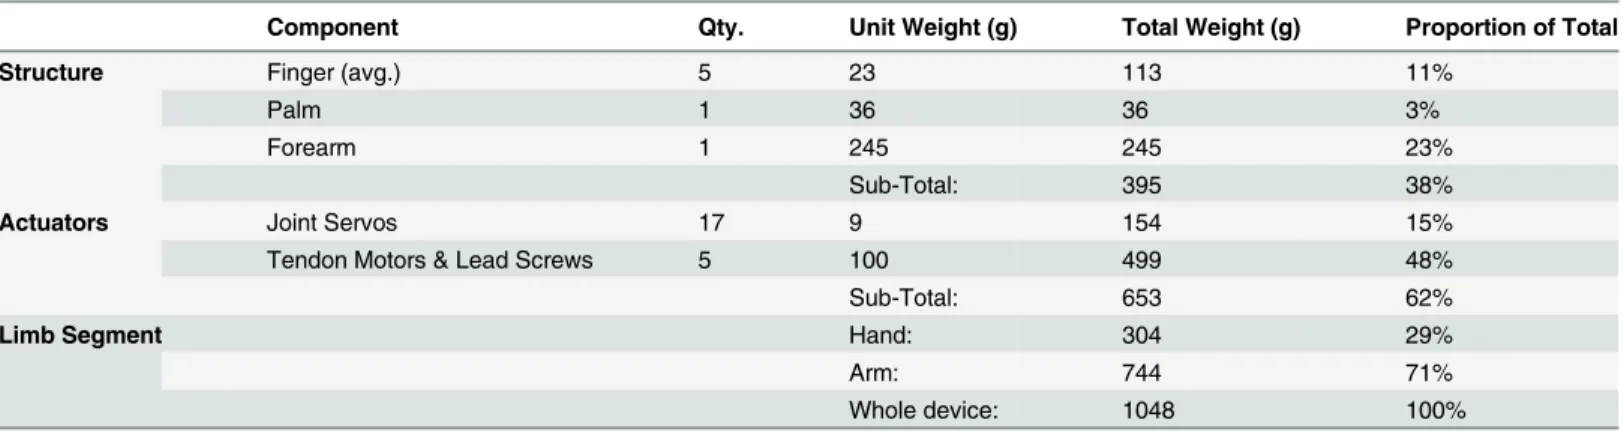 Table 1. Breakdown of prosthesis weight by component and limb segment.